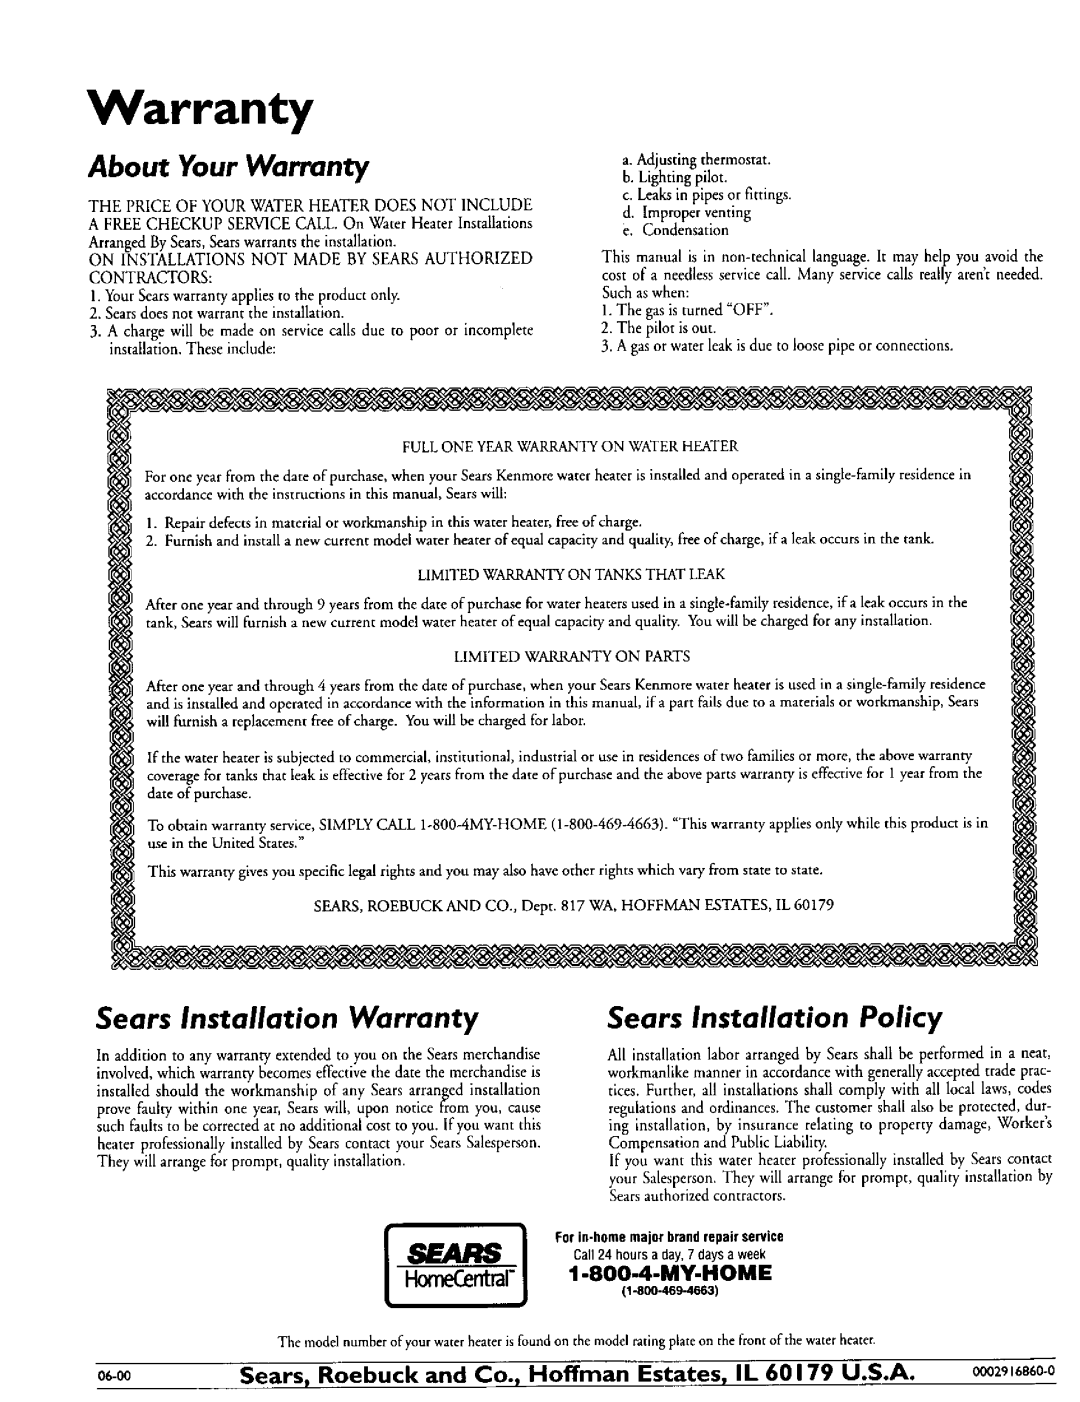 Kenmore 153.335942 o6-oo, oooz9,686o, About Your Warranty, Sears Installation Warranty, Sears Installation Policy 